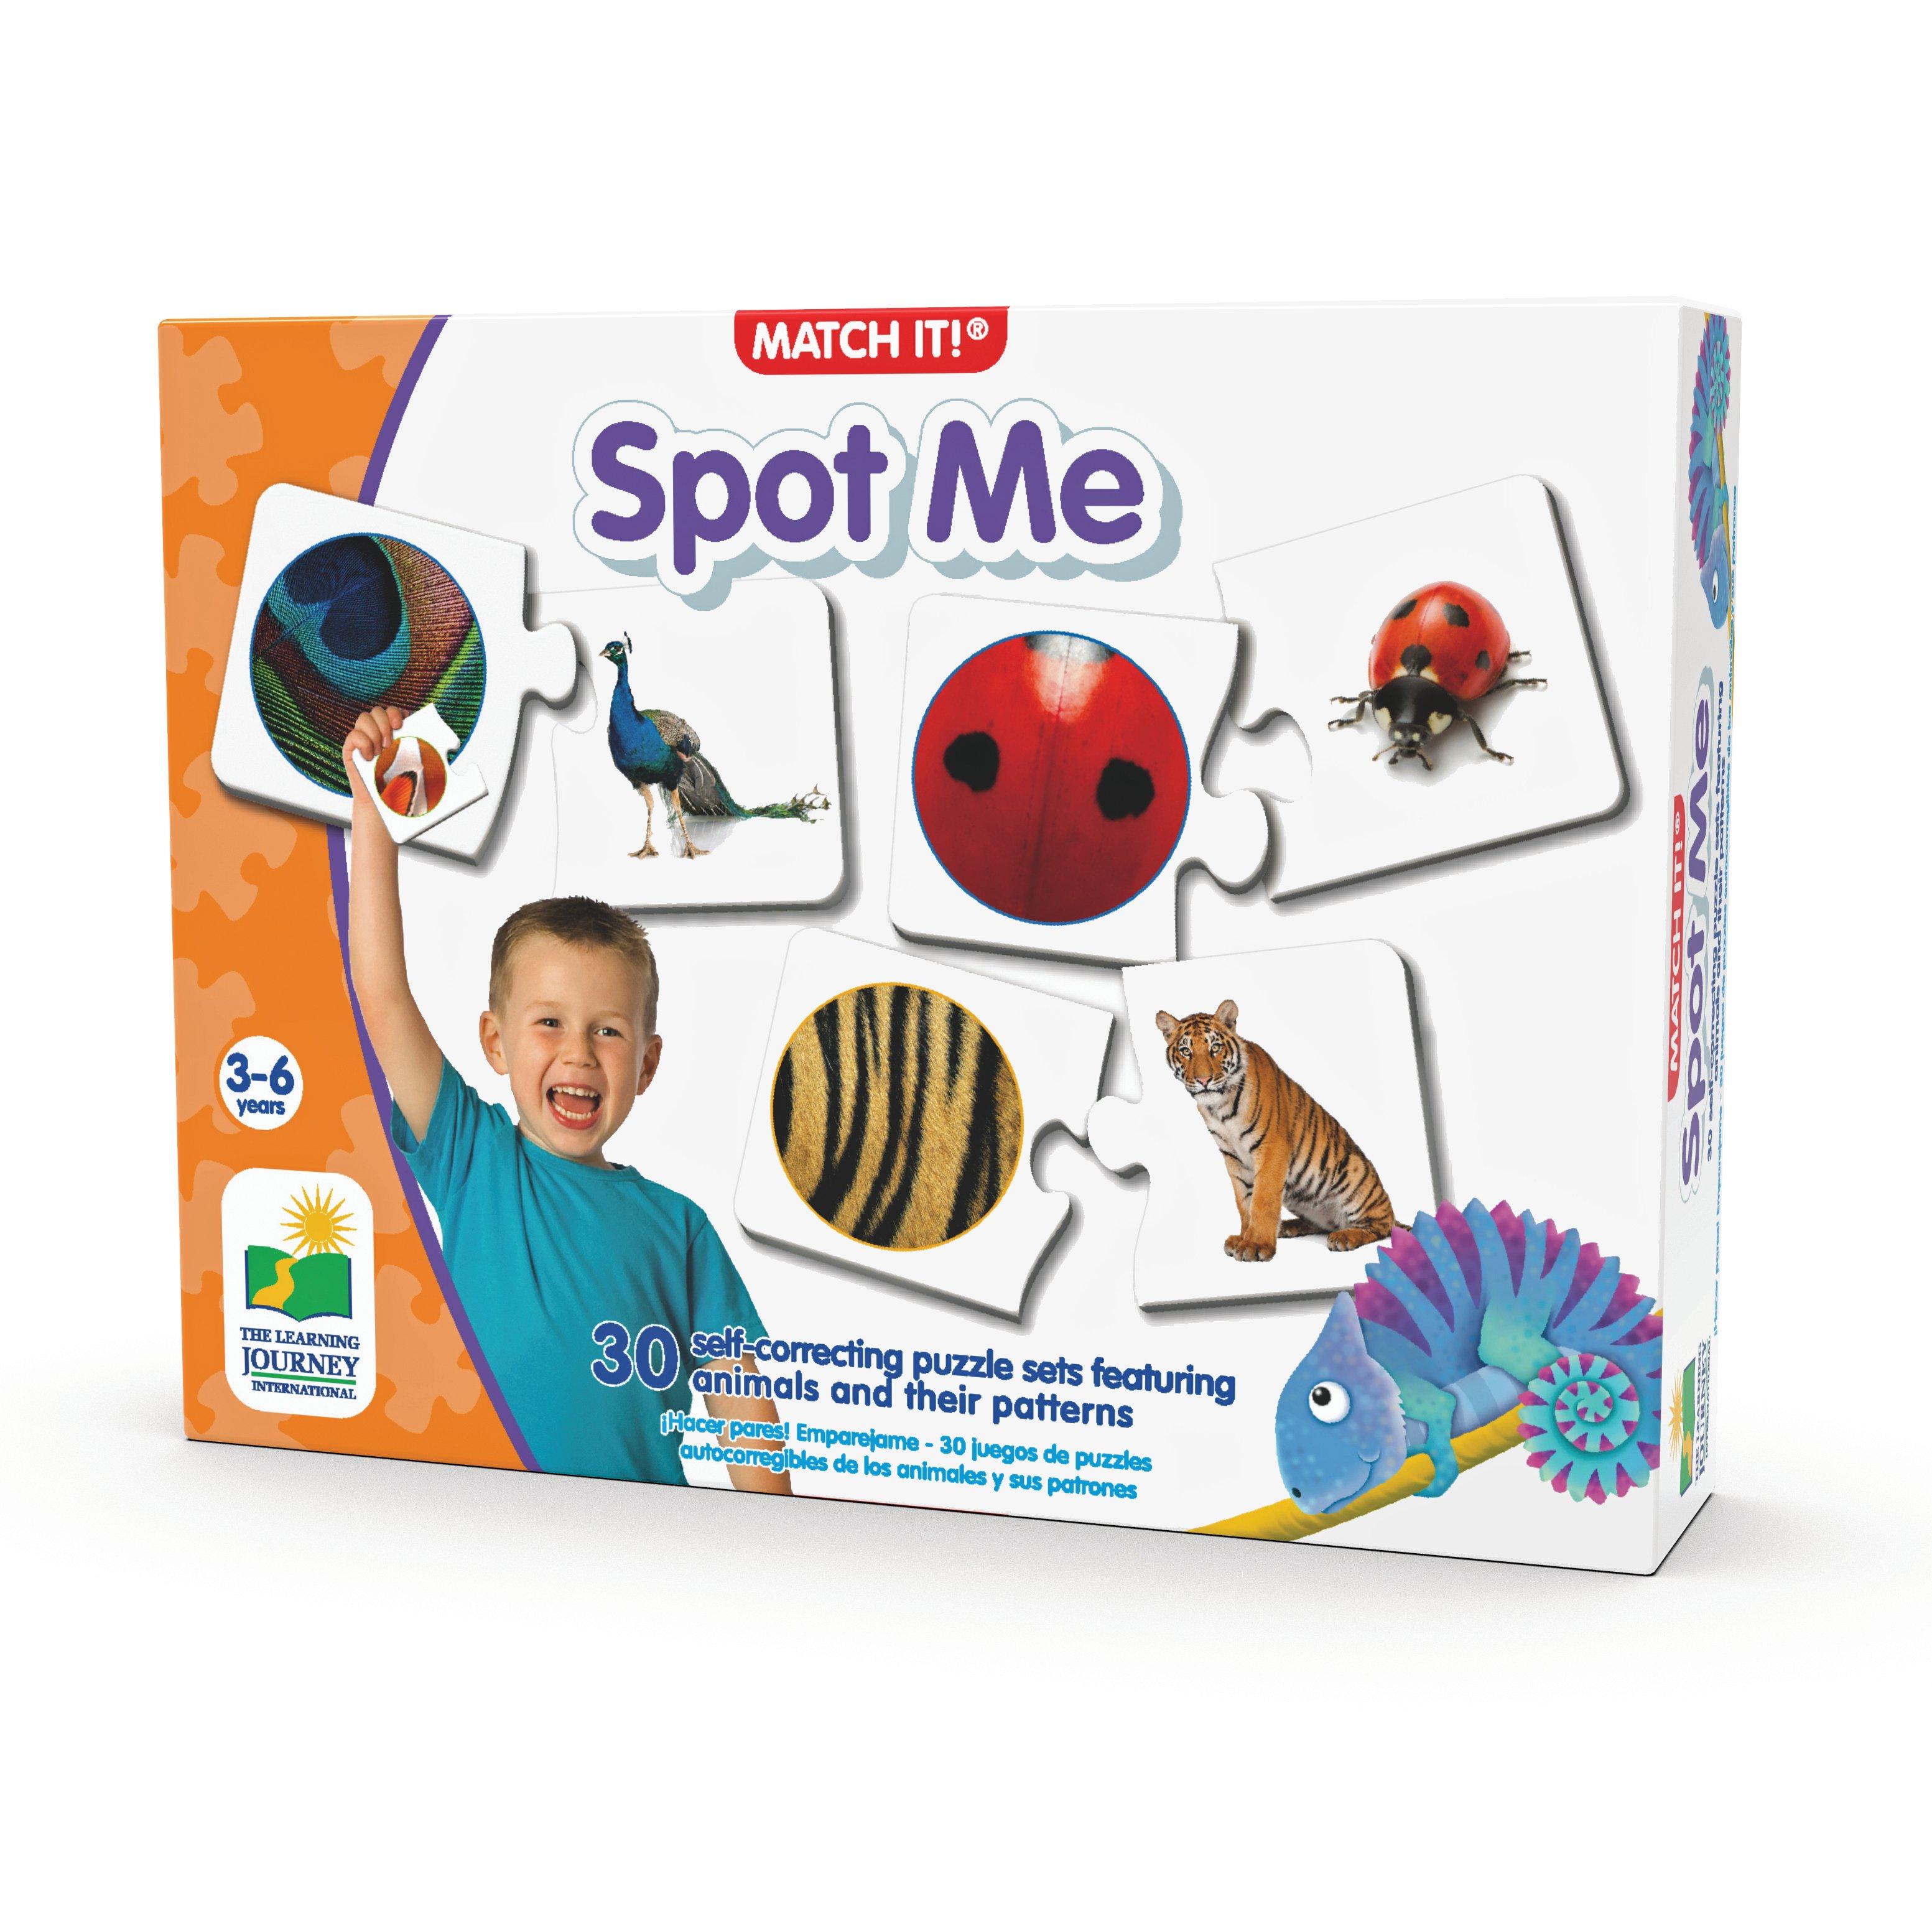 The Learning Journey Match It! Spot Me 30 Piece Self-Correcting Puzzle Set